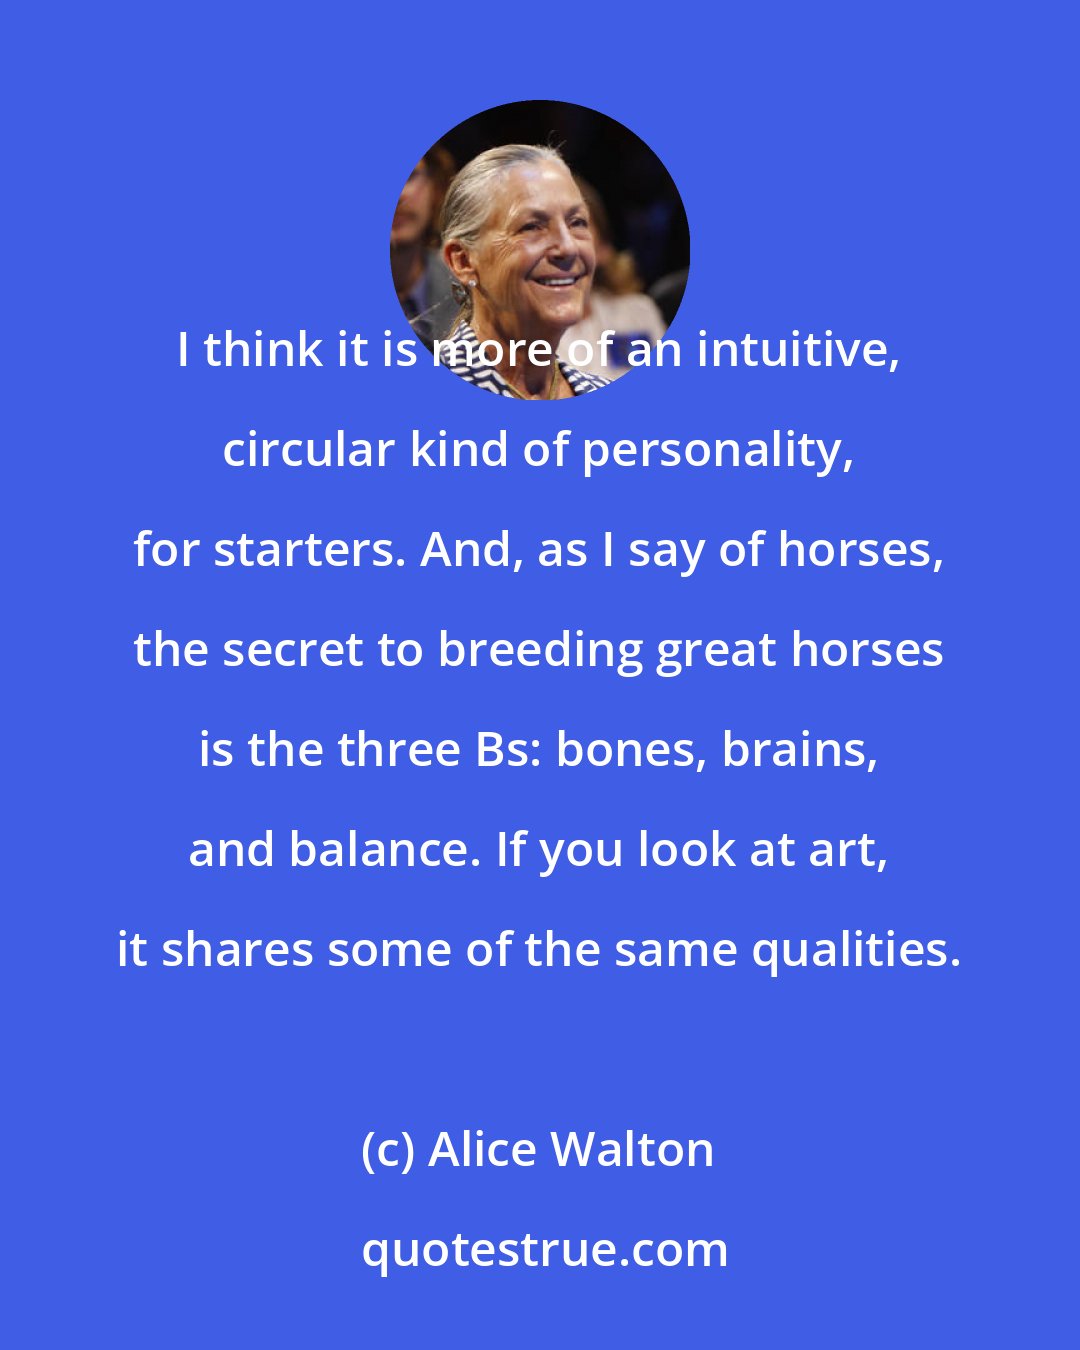 Alice Walton: I think it is more of an intuitive, circular kind of personality, for starters. And, as I say of horses, the secret to breeding great horses is the three Bs: bones, brains, and balance. If you look at art, it shares some of the same qualities.